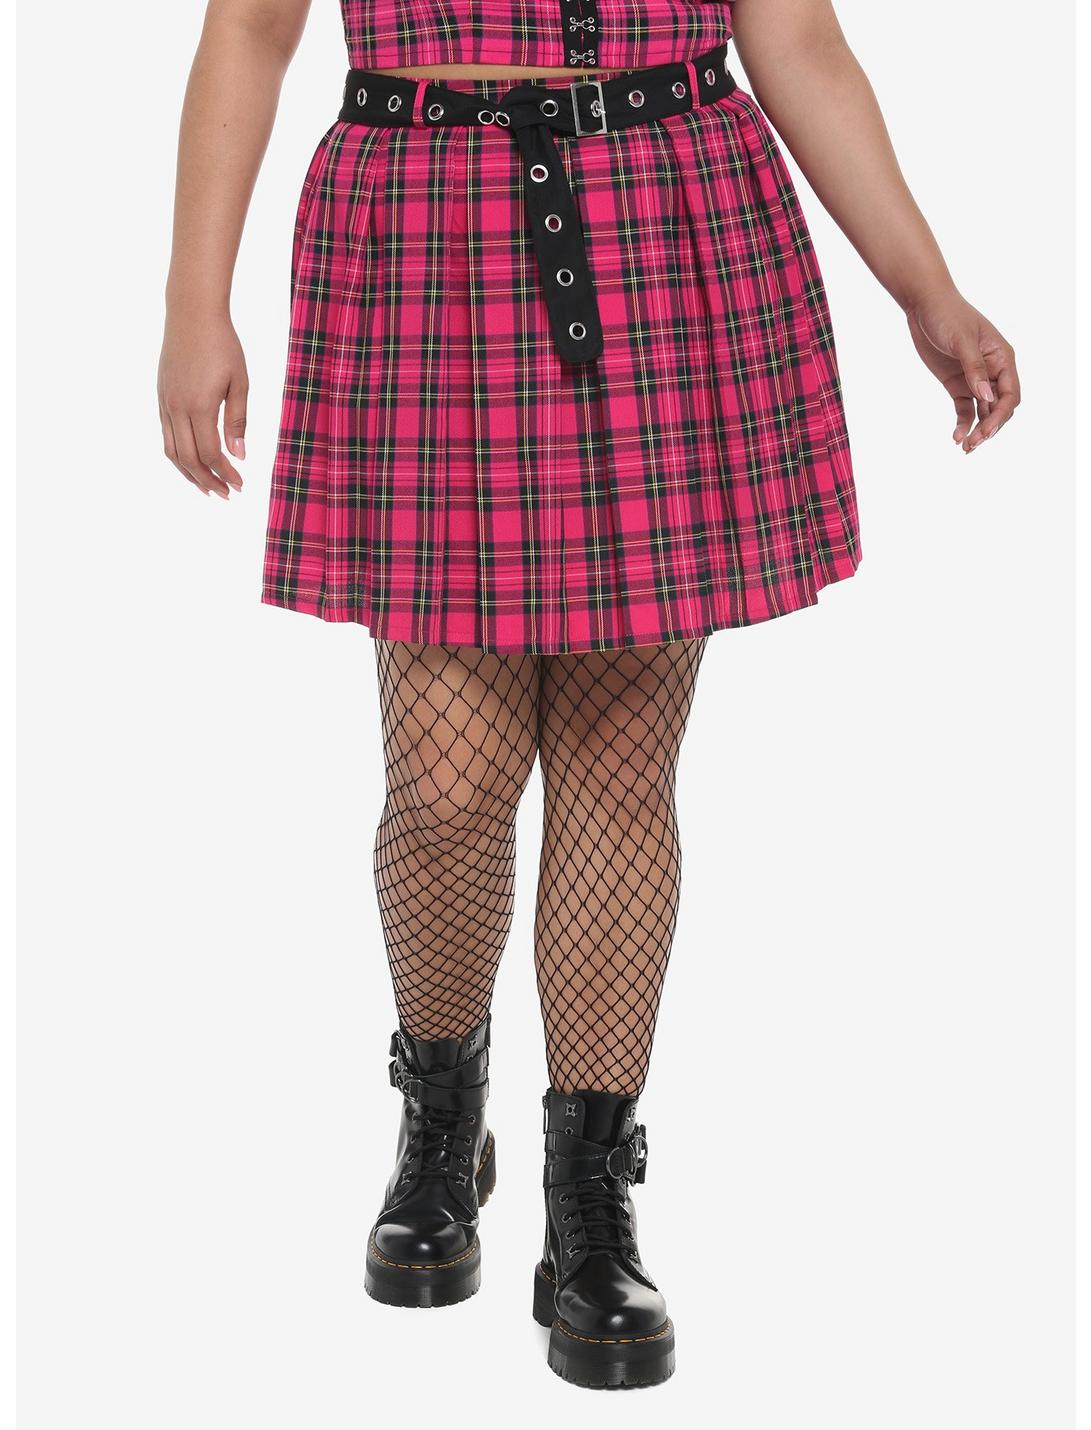 Hot Pink Tartan Pleated Skirt With Grommet Belt Plus Size, PLAID - PINK, hi-res